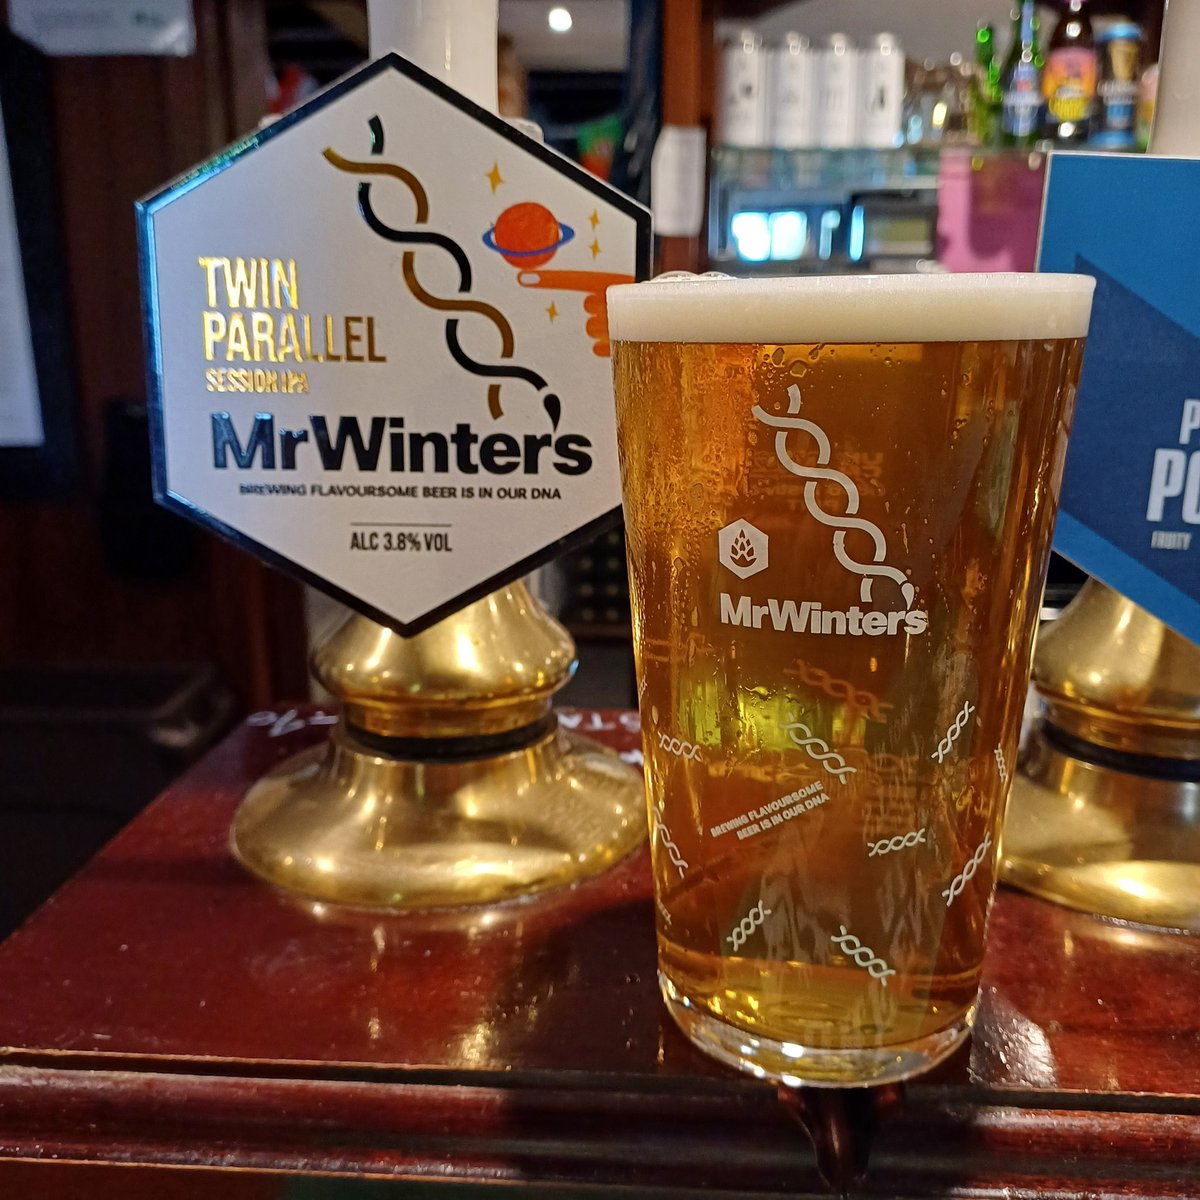 A busy evening @WRacehorse just had to get two more beers on with a brace of @wintersbrewery Twin Parallel IPA & Fusioneer Mild #cheers #FridayFeeling